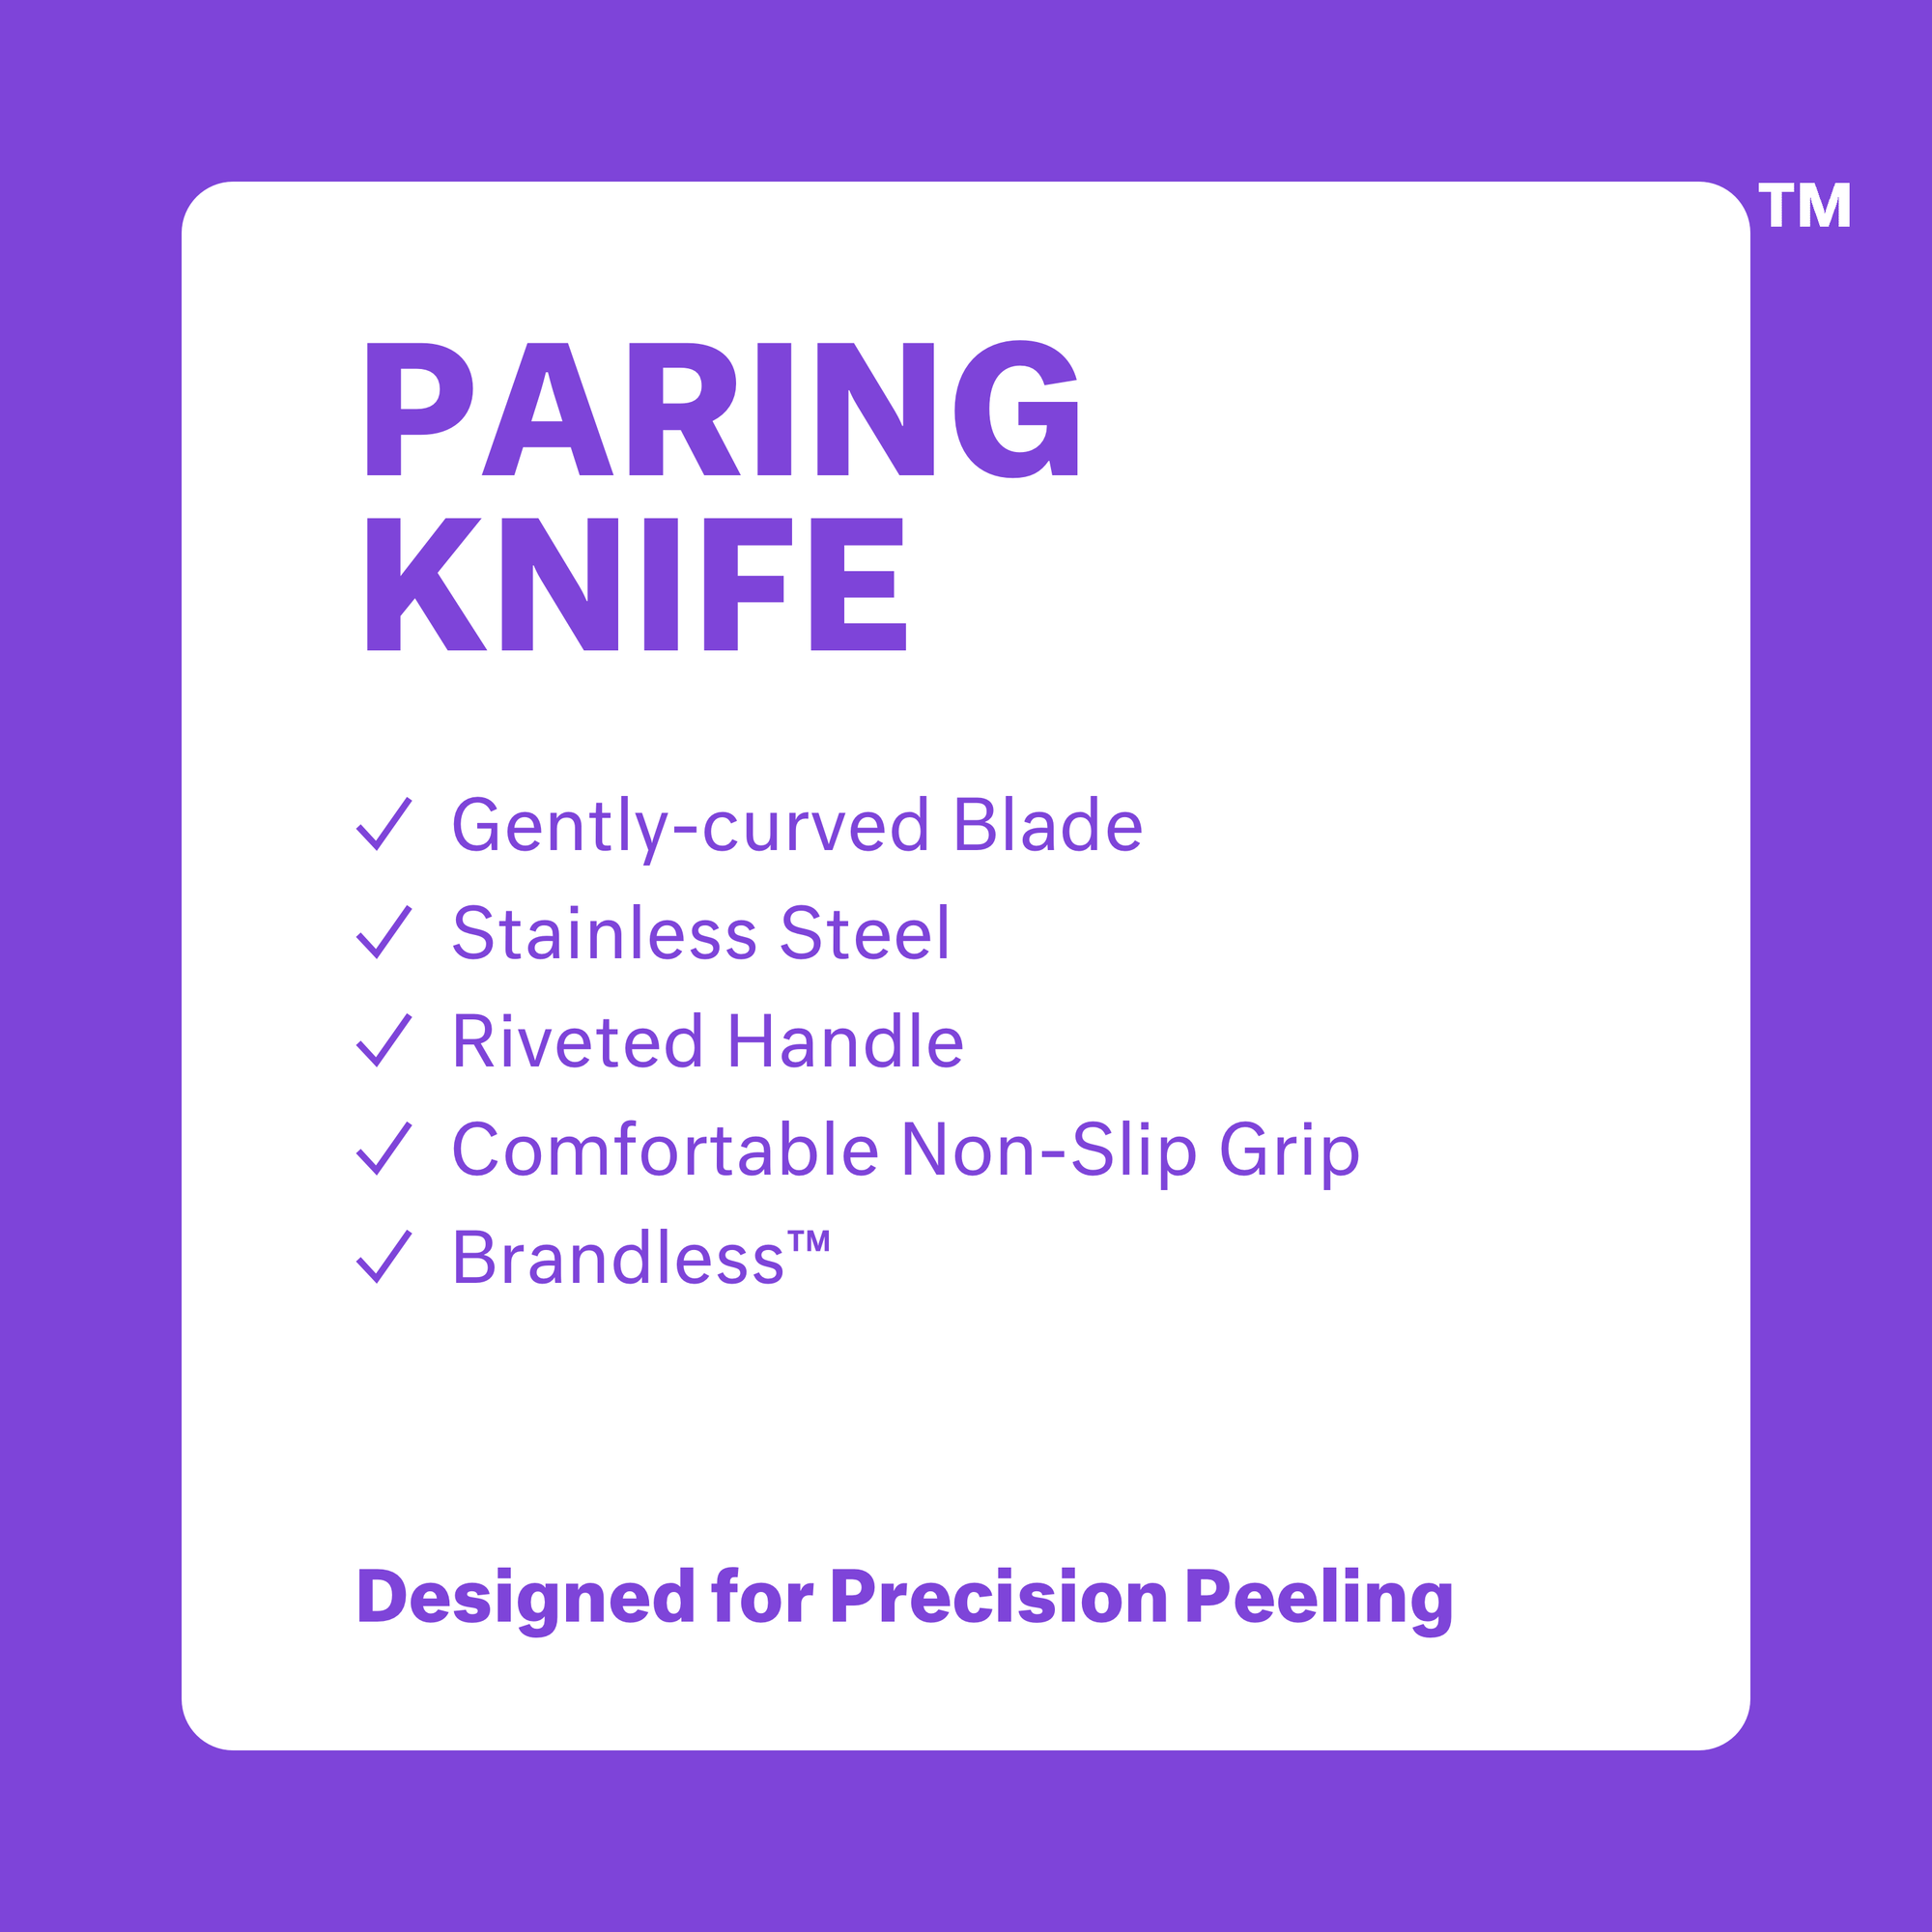 https://cdn.shopify.com/s/files/1/0291/6427/3757/products/53030_paring_knife_atrribute_sq_bc228800-08eb-4b0f-84fa-fddb04d0746e_2000x.png?v=1671780045